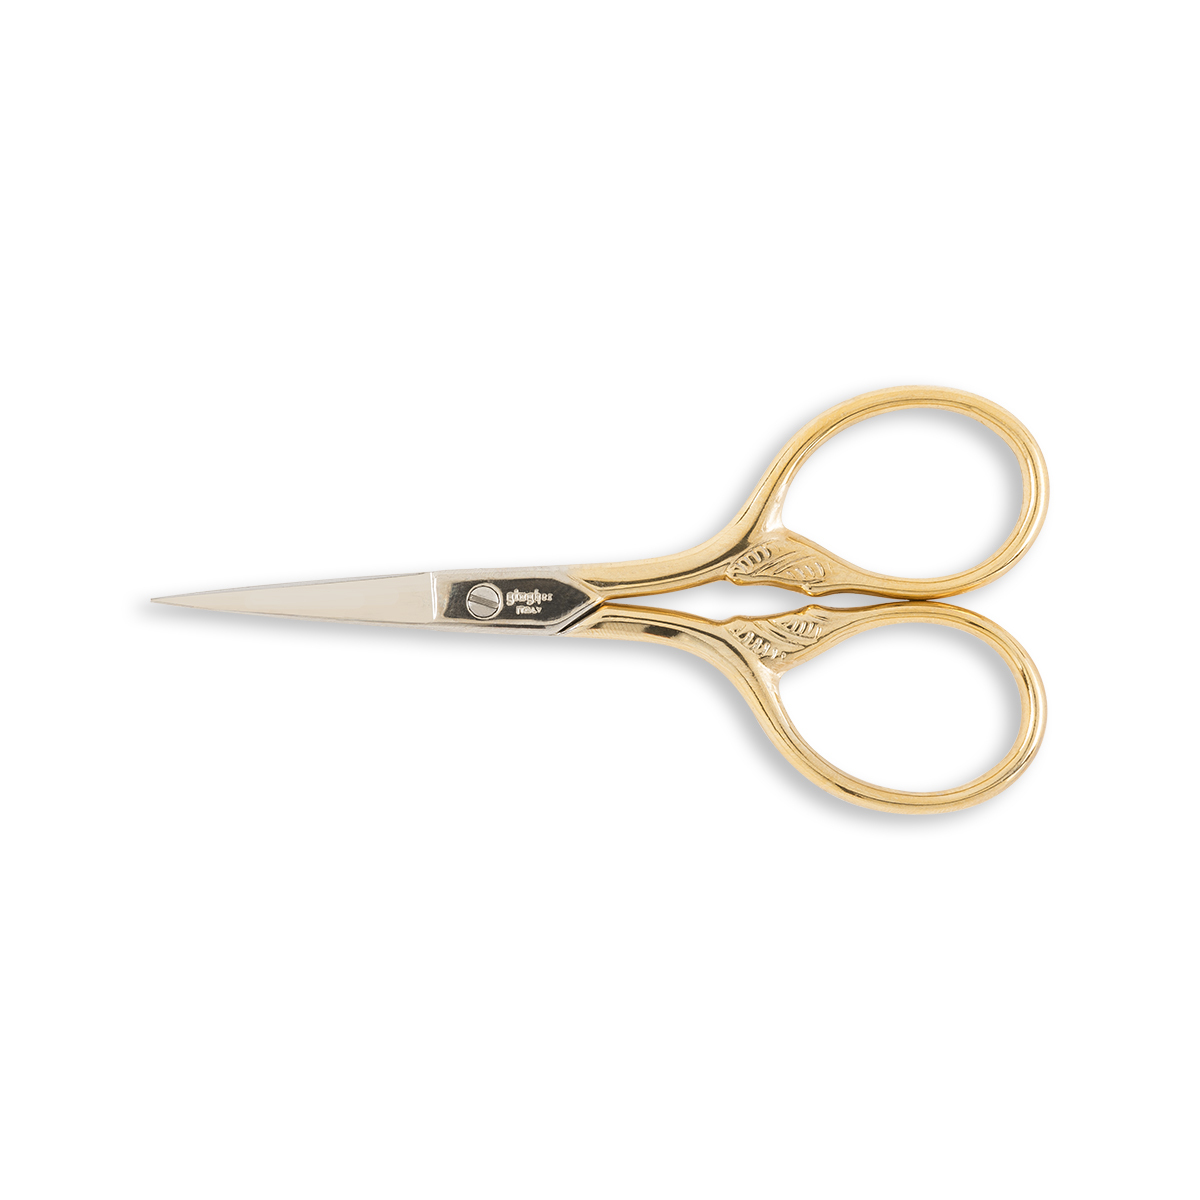 Lykke Scissors - 24K Gold Plated Embroidery Scissors at Jimmy Beans Wool